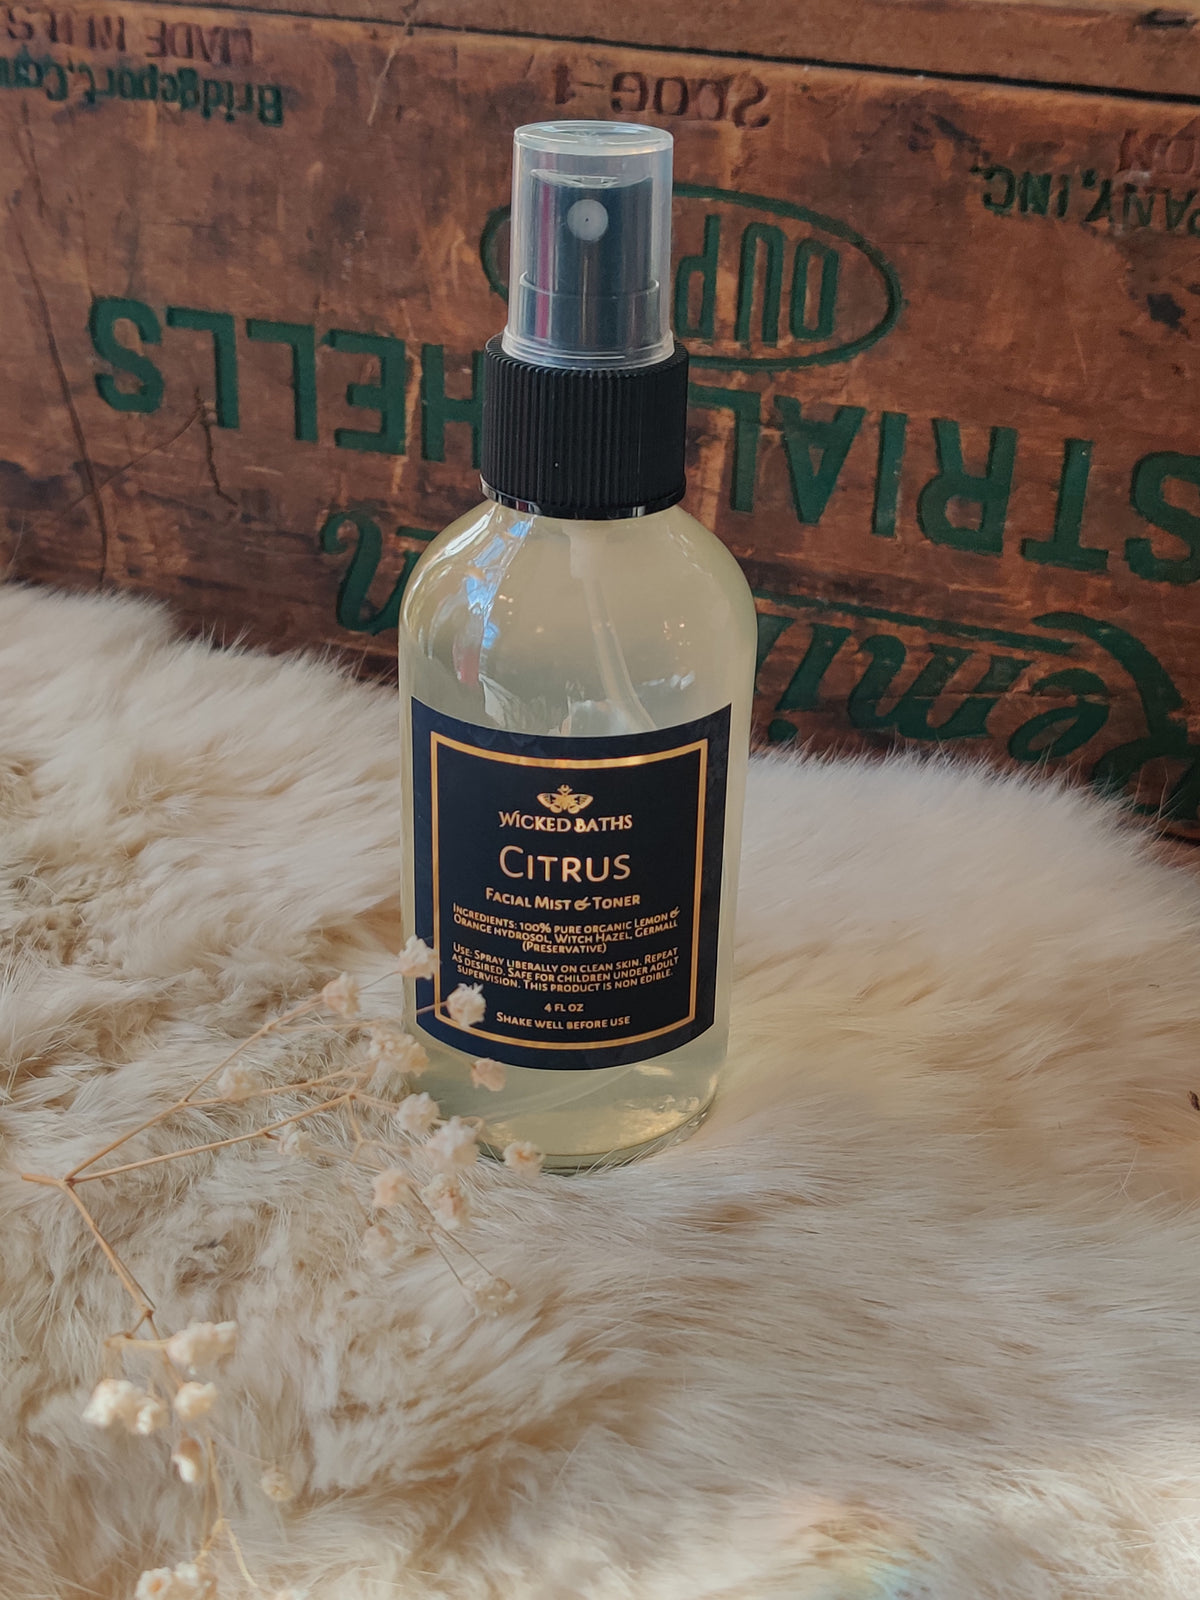 Wicked Baths Facial Mists